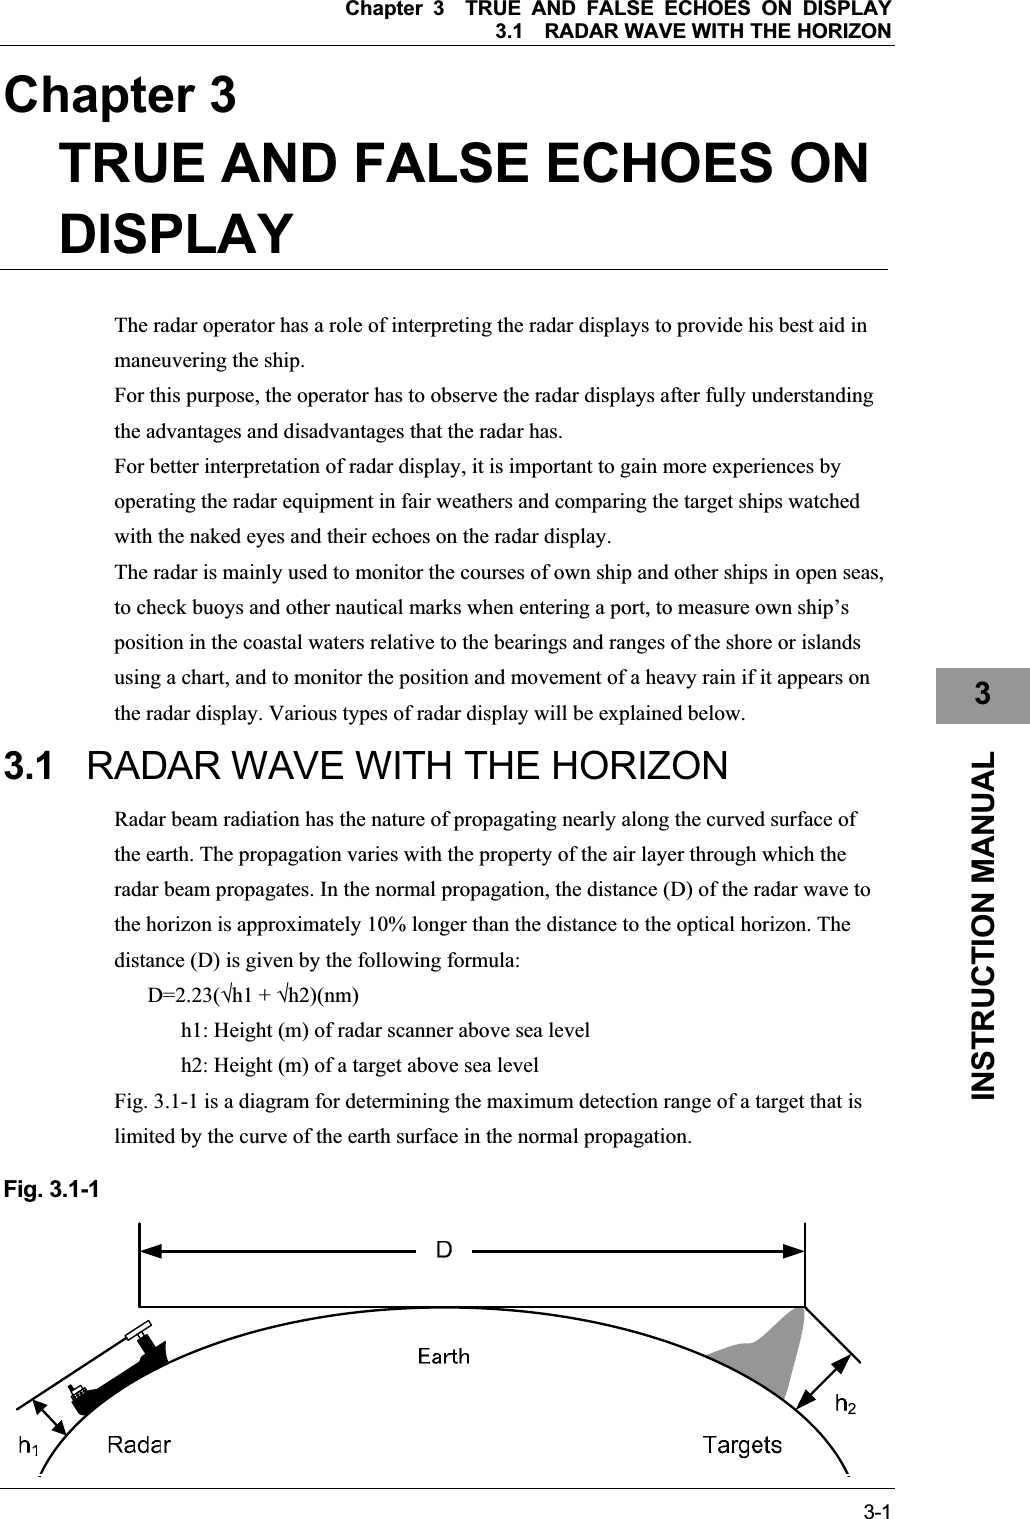 Chapter 3TRUE AND FALSE ECHOES ON DISPLAY 3.1RADAR WAVE WITH THE HORIZON 3-13INSTRUCTION MANUAL Chapter 3TRUE AND FALSE ECHOES ON DISPLAYThe radar operator has a role of interpreting the radar displays to provide his best aid in maneuvering the ship. For this purpose, the operator has to observe the radar displays after fully understanding the advantages and disadvantages that the radar has. For better interpretation of radar display, it is important to gain more experiences by operating the radar equipment in fair weathers and comparing the target ships watched with the naked eyes and their echoes on the radar display. The radar is mainly used to monitor the courses of own ship and other ships in open seas, to check buoys and other nautical marks when entering a port, to measure own ship’s position in the coastal waters relative to the bearings and ranges of the shore or islands using a chart, and to monitor the position and movement of a heavy rain if it appears on the radar display. Various types of radar display will be explained below. 3.1 RADAR WAVE WITH THE HORIZON Radar beam radiation has the nature of propagating nearly along the curved surface of the earth. The propagation varies with the property of the air layer through which the radar beam propagates. In the normal propagation, the distance (D) of the radar wave to the horizon is approximately 10% longer than the distance to the optical horizon. The distance (D) is given by the following formula: D=2.23(h1 + h2)(nm) h1: Height (m) of radar scanner above sea level h2: Height (m) of a target above sea level Fig. 3.1-1 is a diagram for determining the maximum detection range of a target that is limited by the curve of the earth surface in the normal propagation. Fig. 3.1-1 